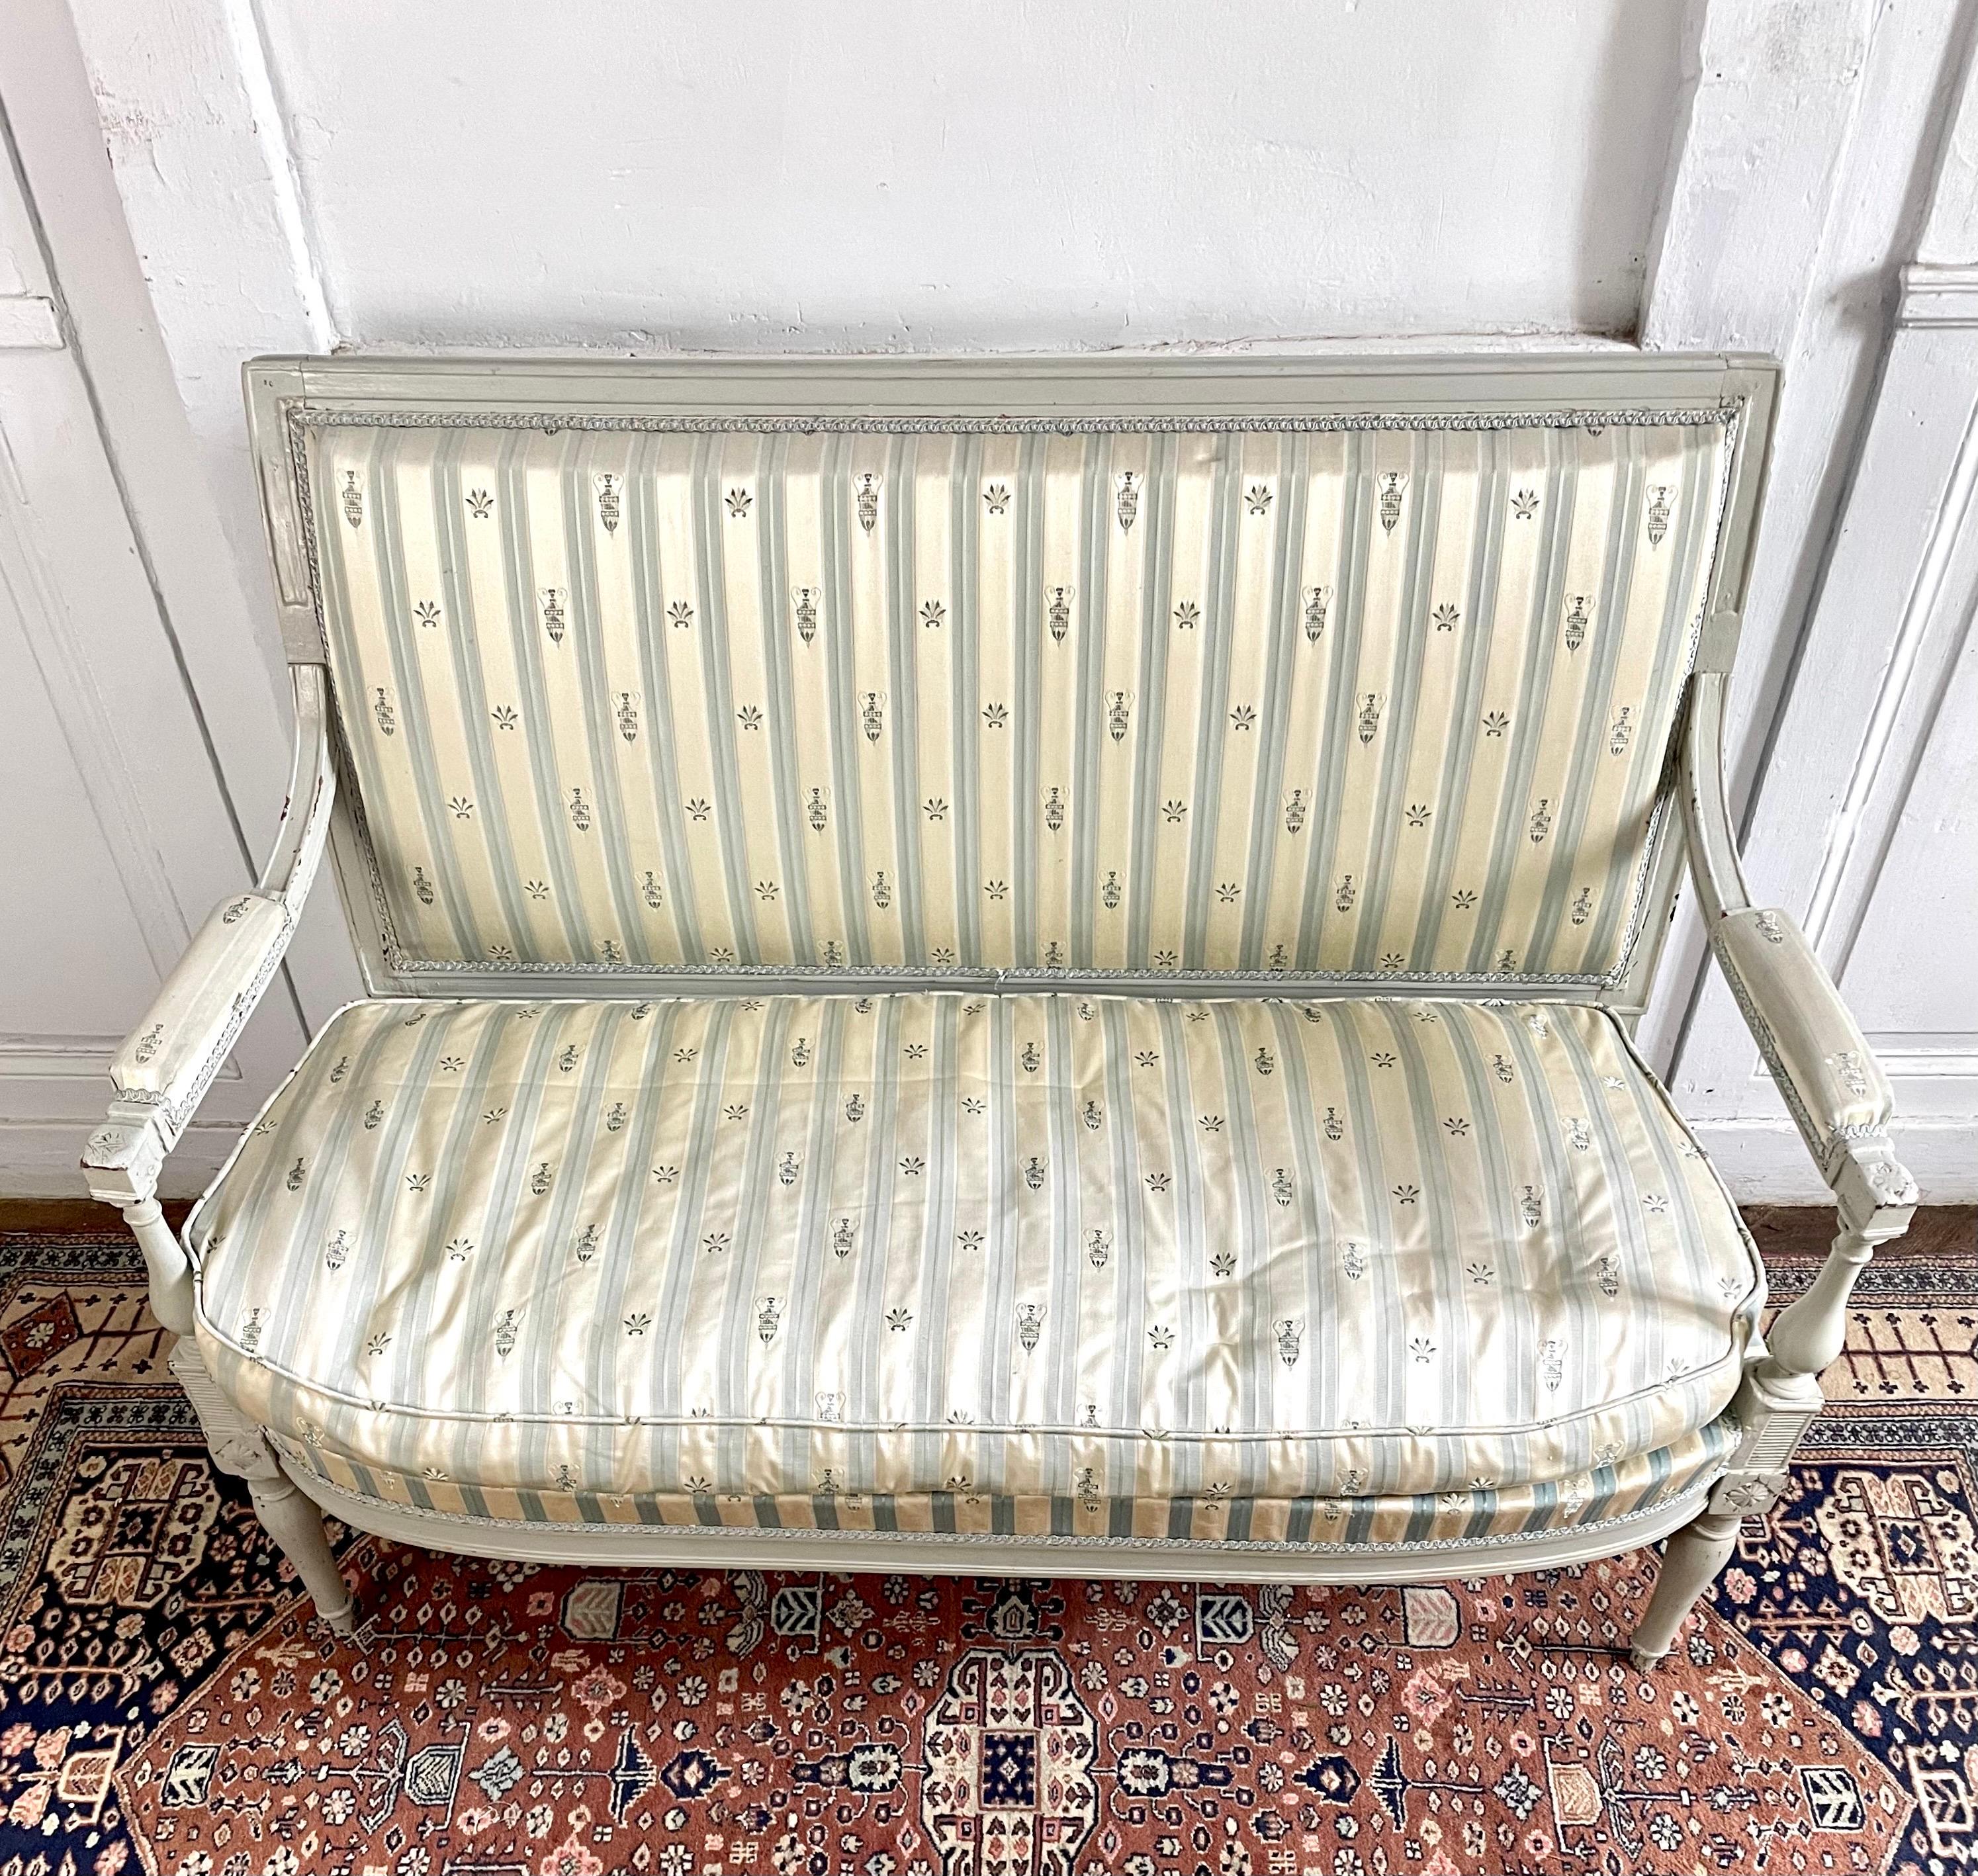 Small bench Directoire period, end of reign of Louis XVI.
Magnificent patterned silk upholstery for the seat and plain blue silk on the back of the bench. Very good condition.
Grey, blue white.
Solid wood painted in blue/grey perfectly matches the